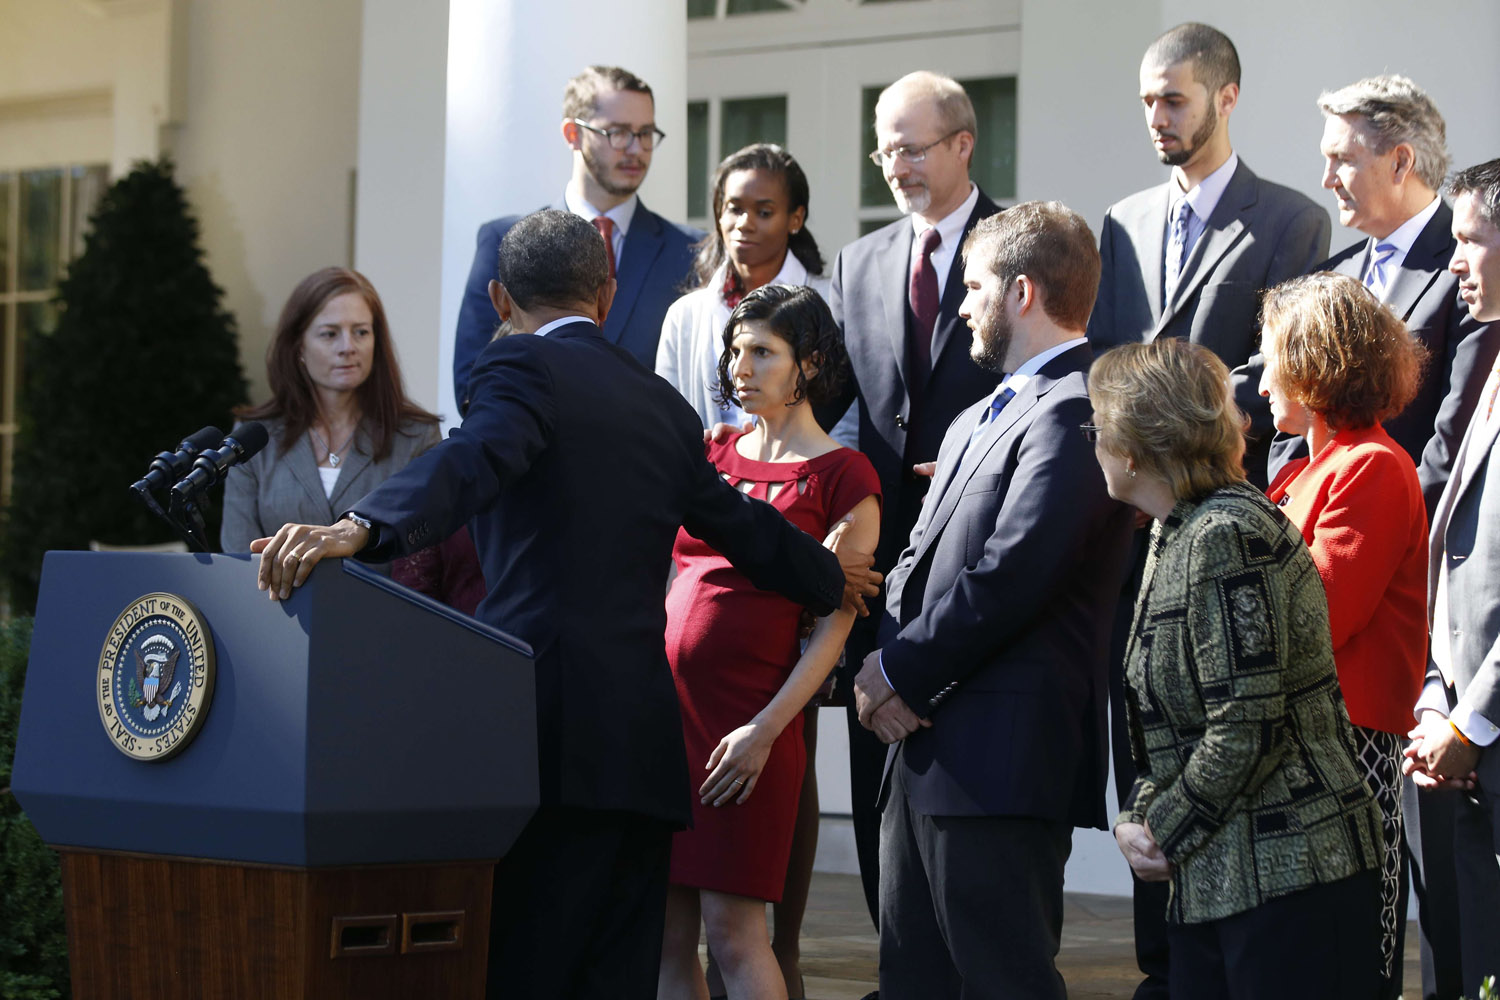 Oct. 21, 2013. U.S. President Barack Obama (2ndL) reaches out to help Affordable Care Act beneficiary Karmel Allison (C), who began to faint during the president's speech about healthcare from the Rose Garden of the White House in Washington.